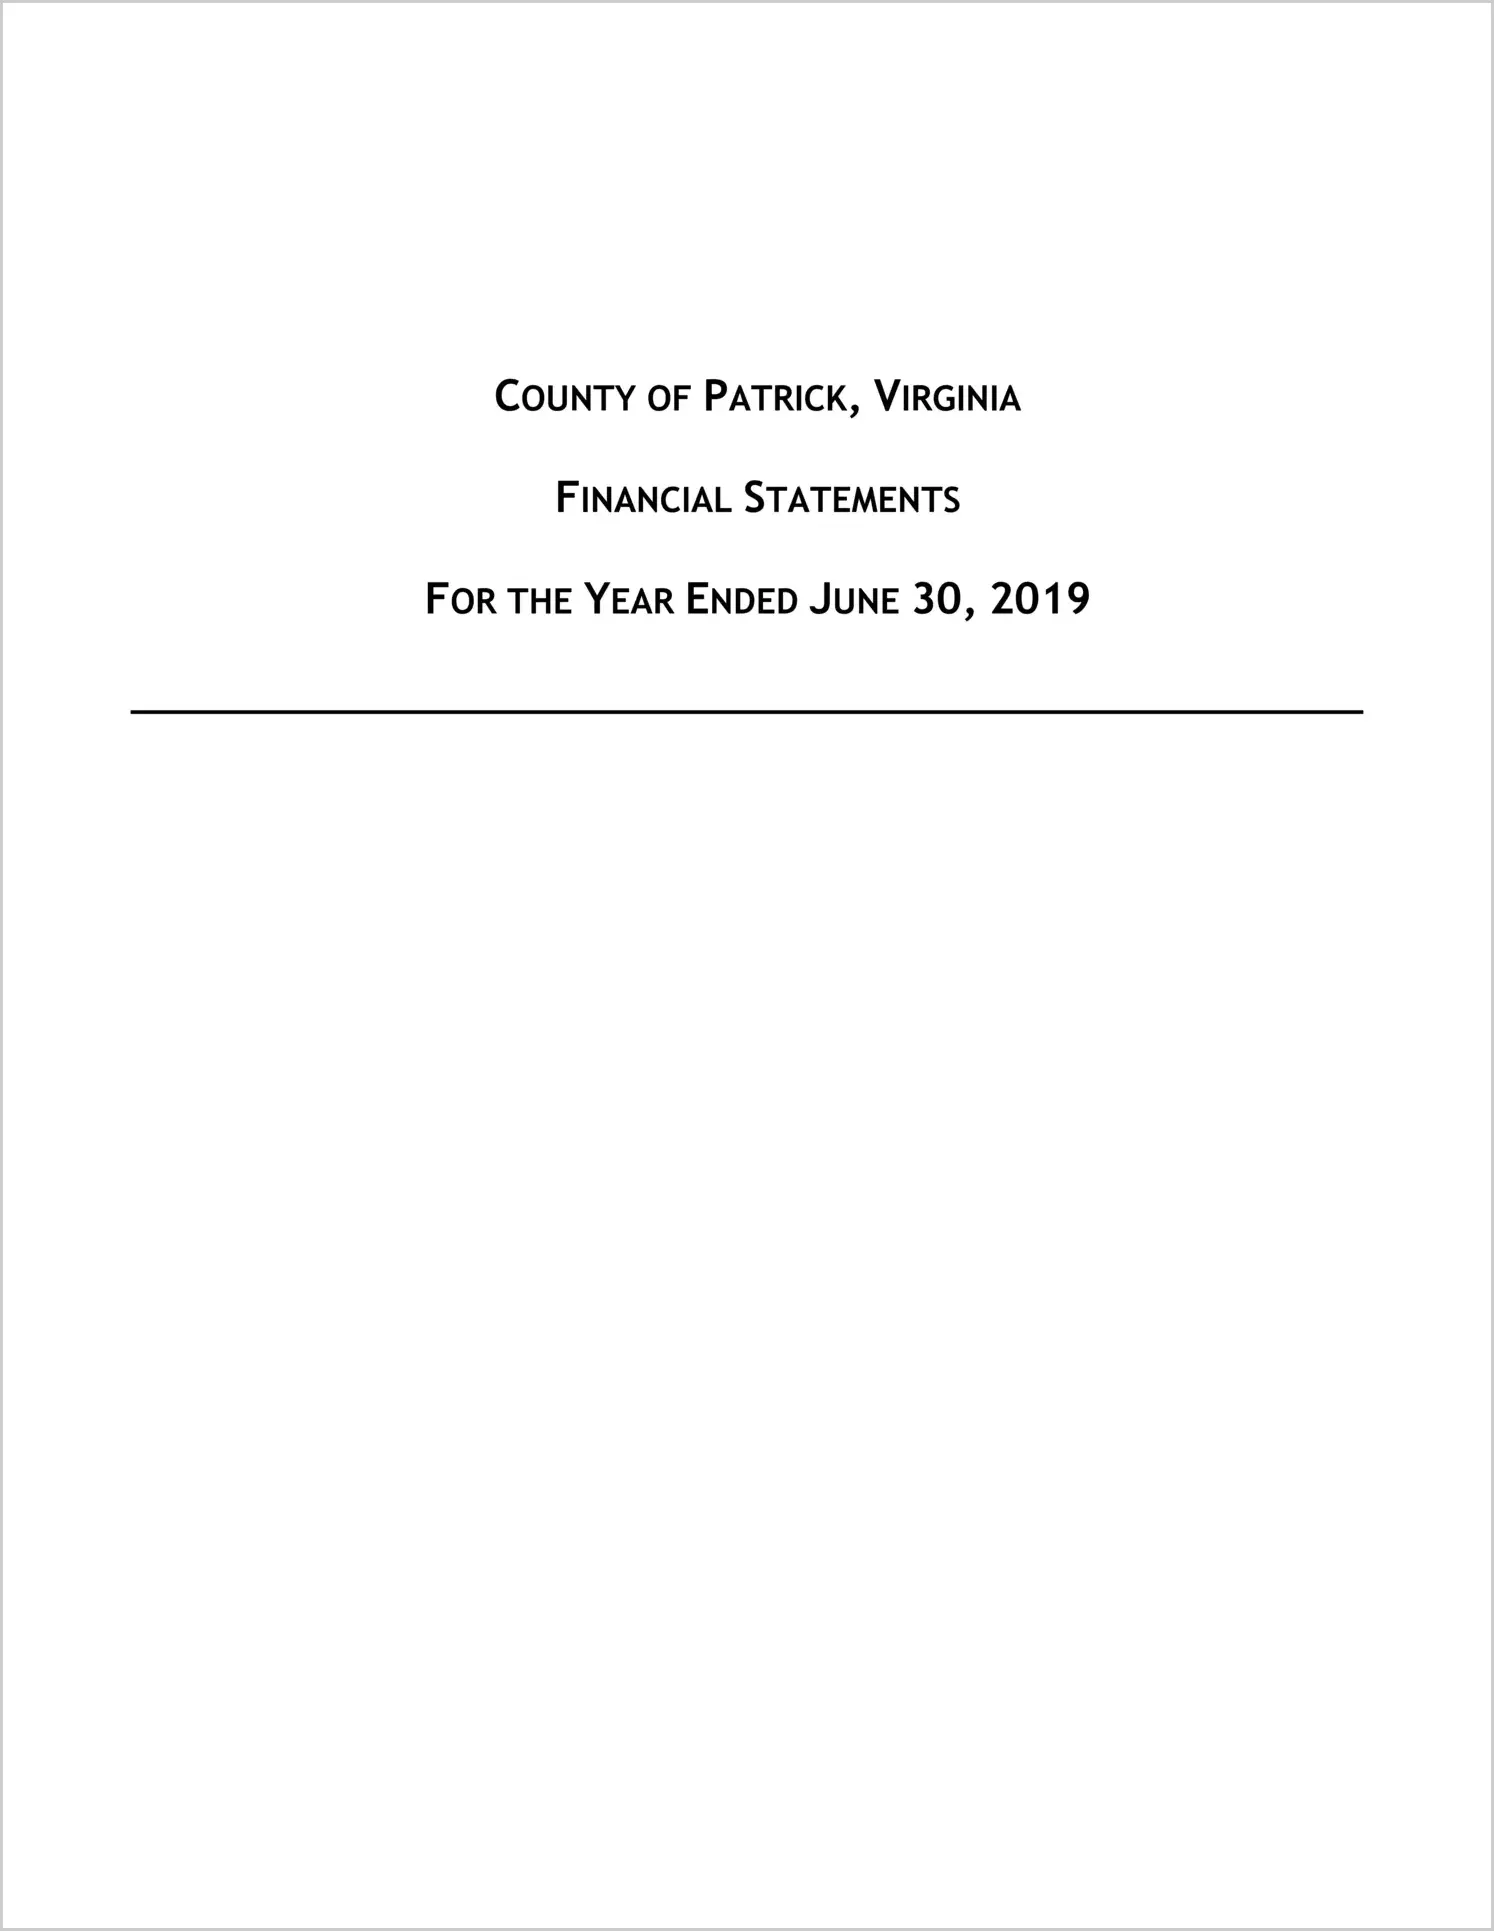 2019 Annual Financial Report for County of Patrick